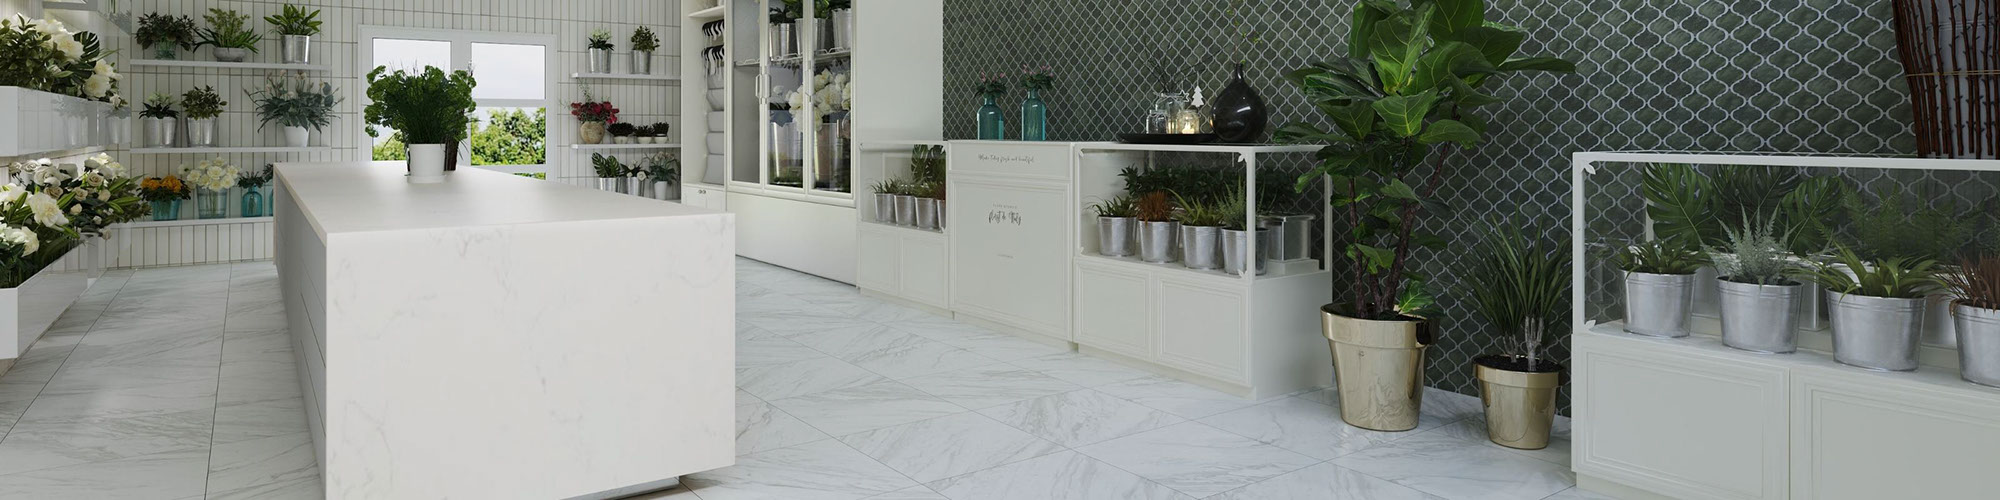 Flower shop with white floor tiles that look like marble, green arabesque mosaic wall tile, white floating shelves holding plants and flower bouquets.